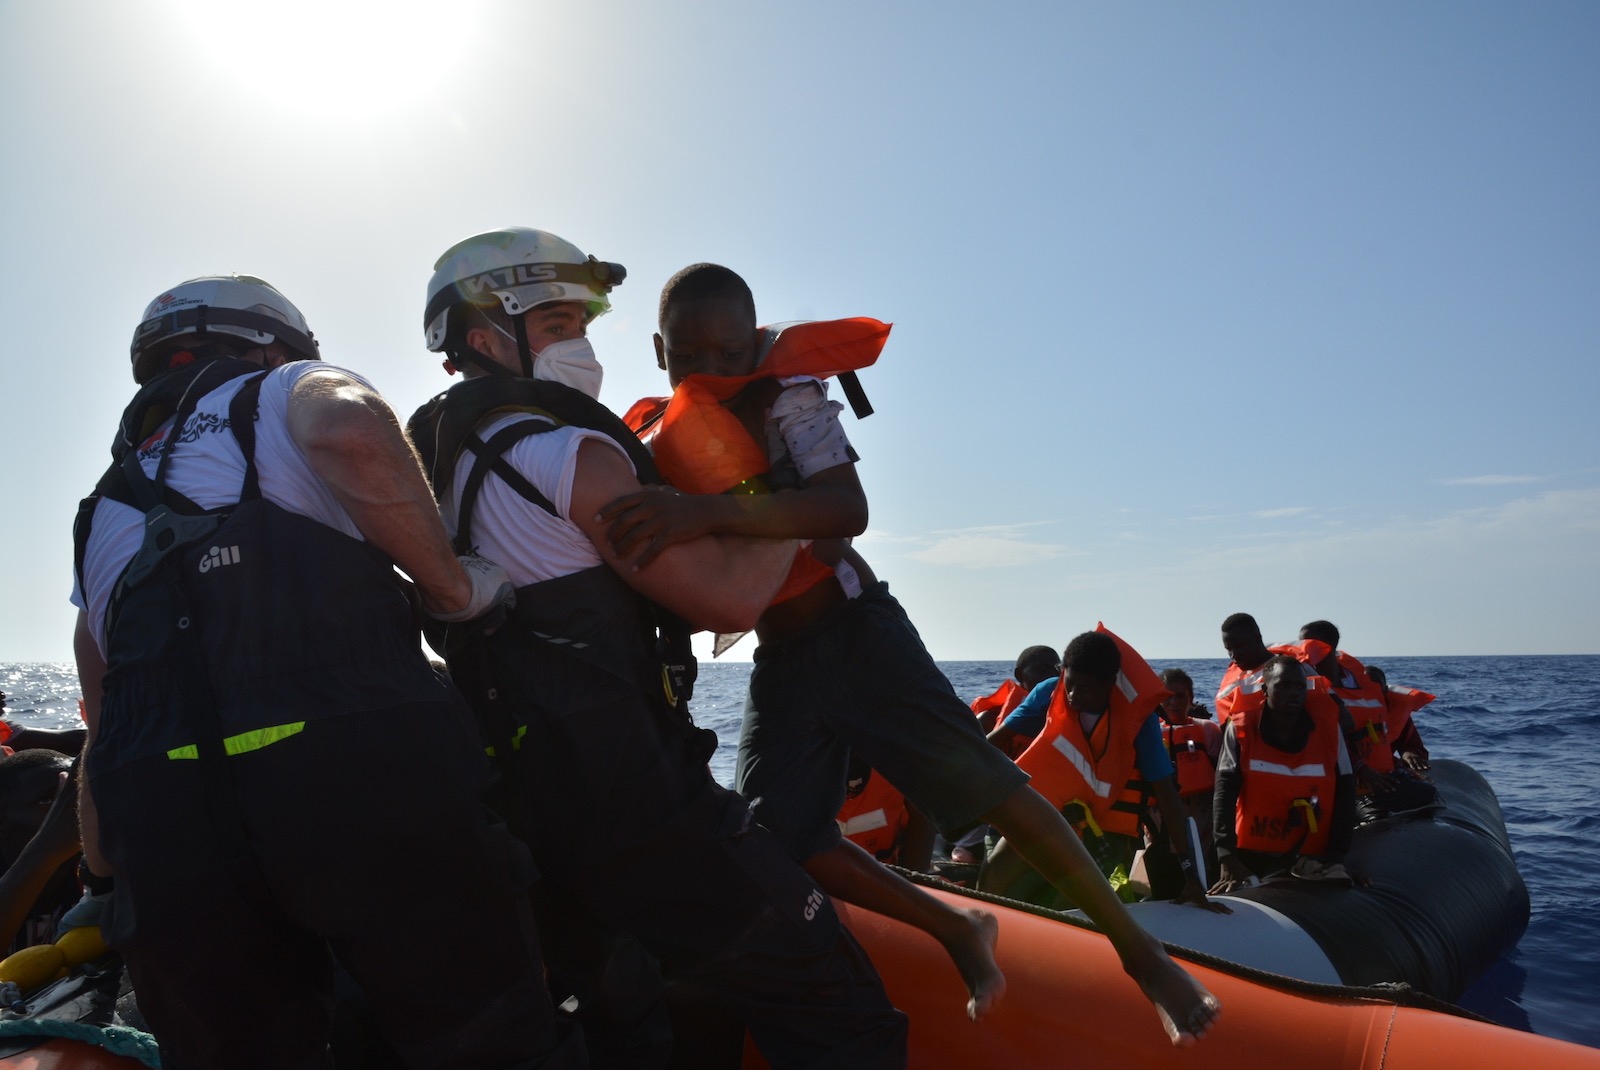 A man lifting a young child off a boat during a rescue at sea